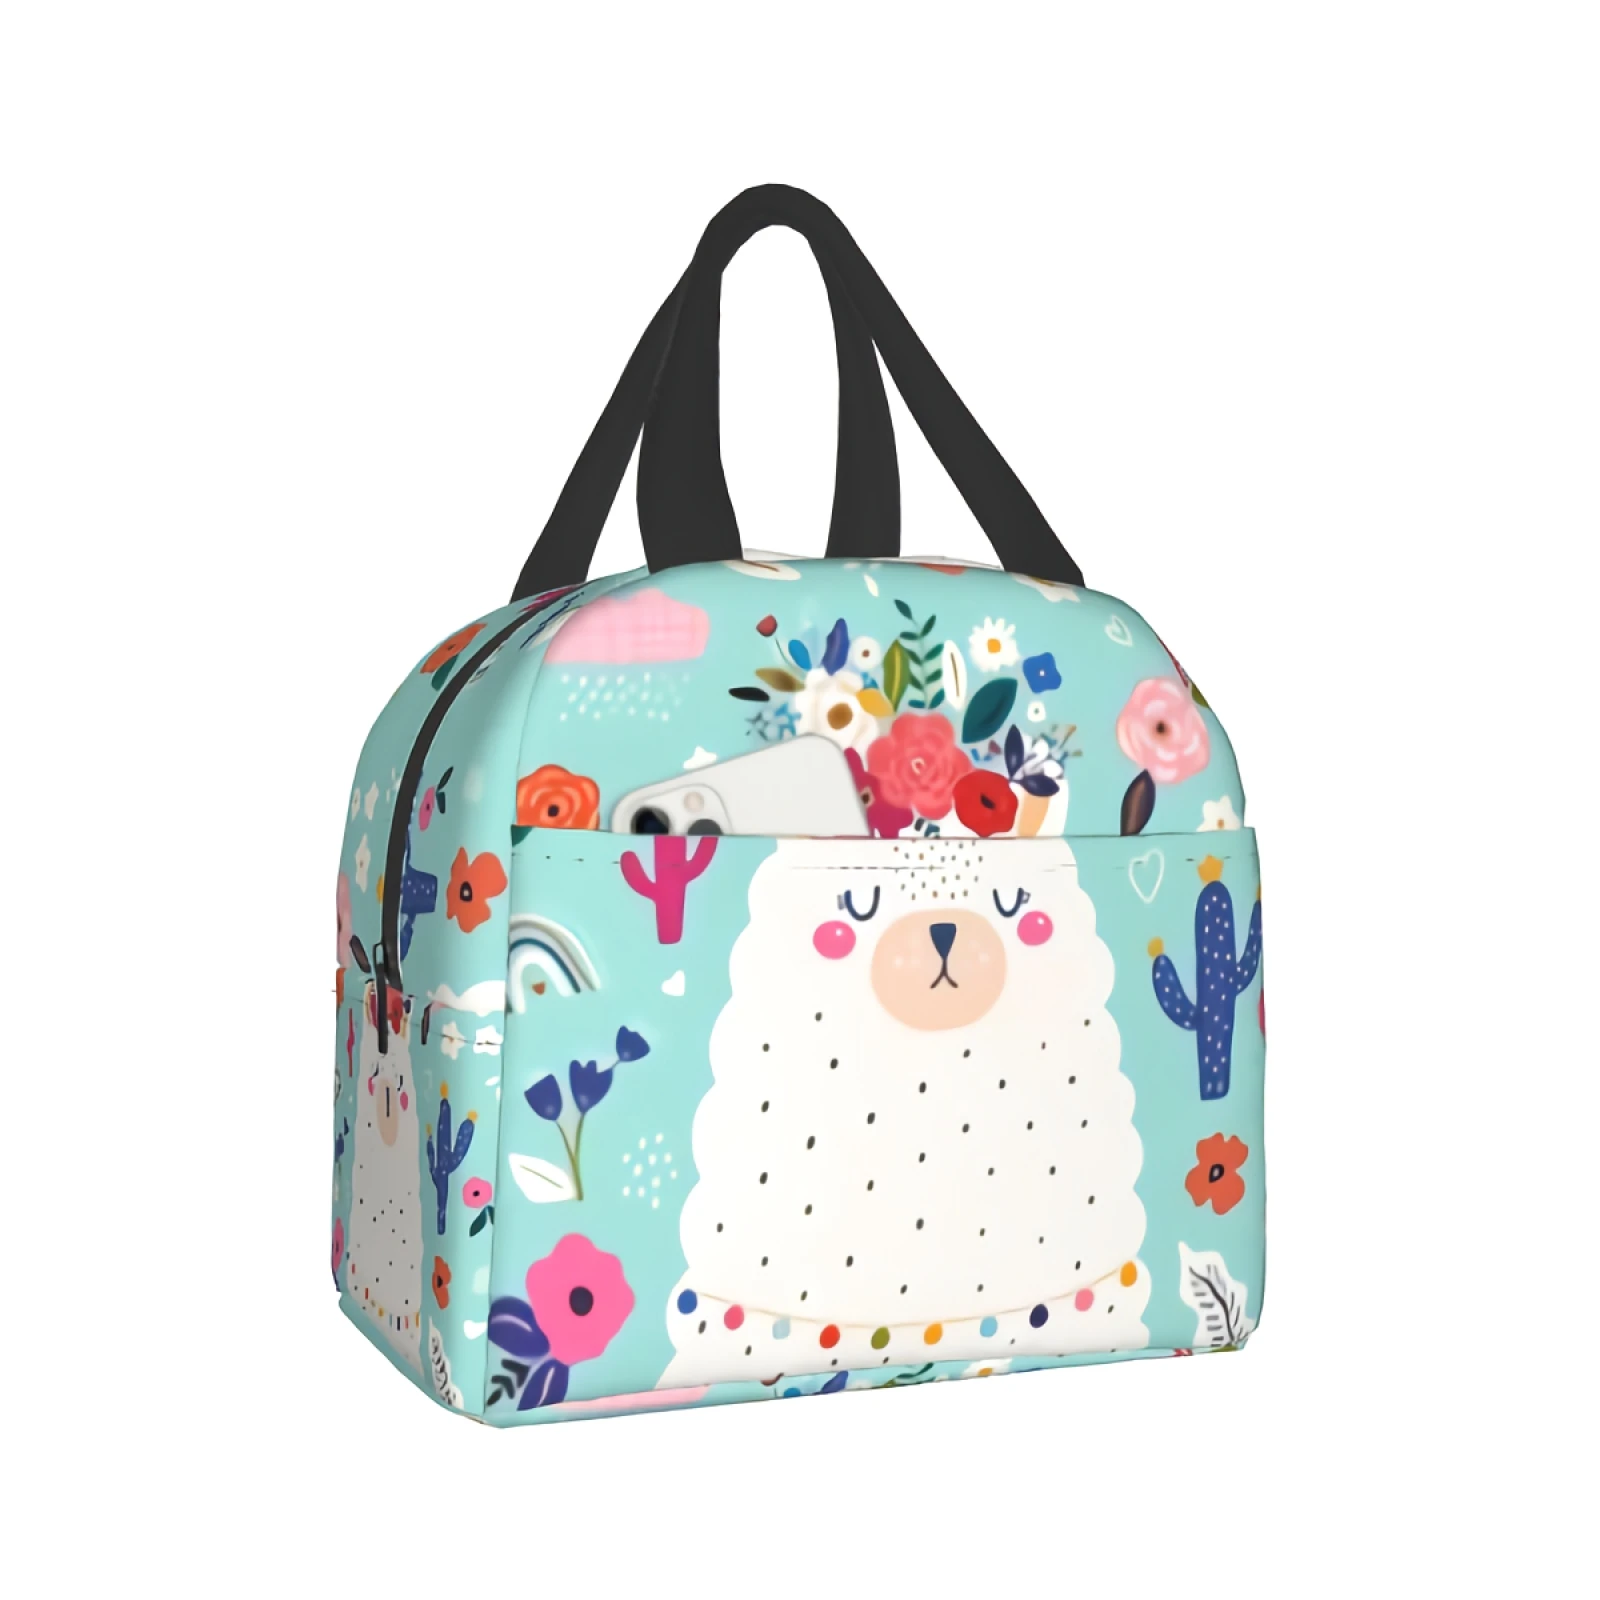 

Cute Baby Alpaca Llama With Spring Floral Wreath Cactus Insulated Lunch Bag Reusable Leakproof Lunch Box for Work School Travel